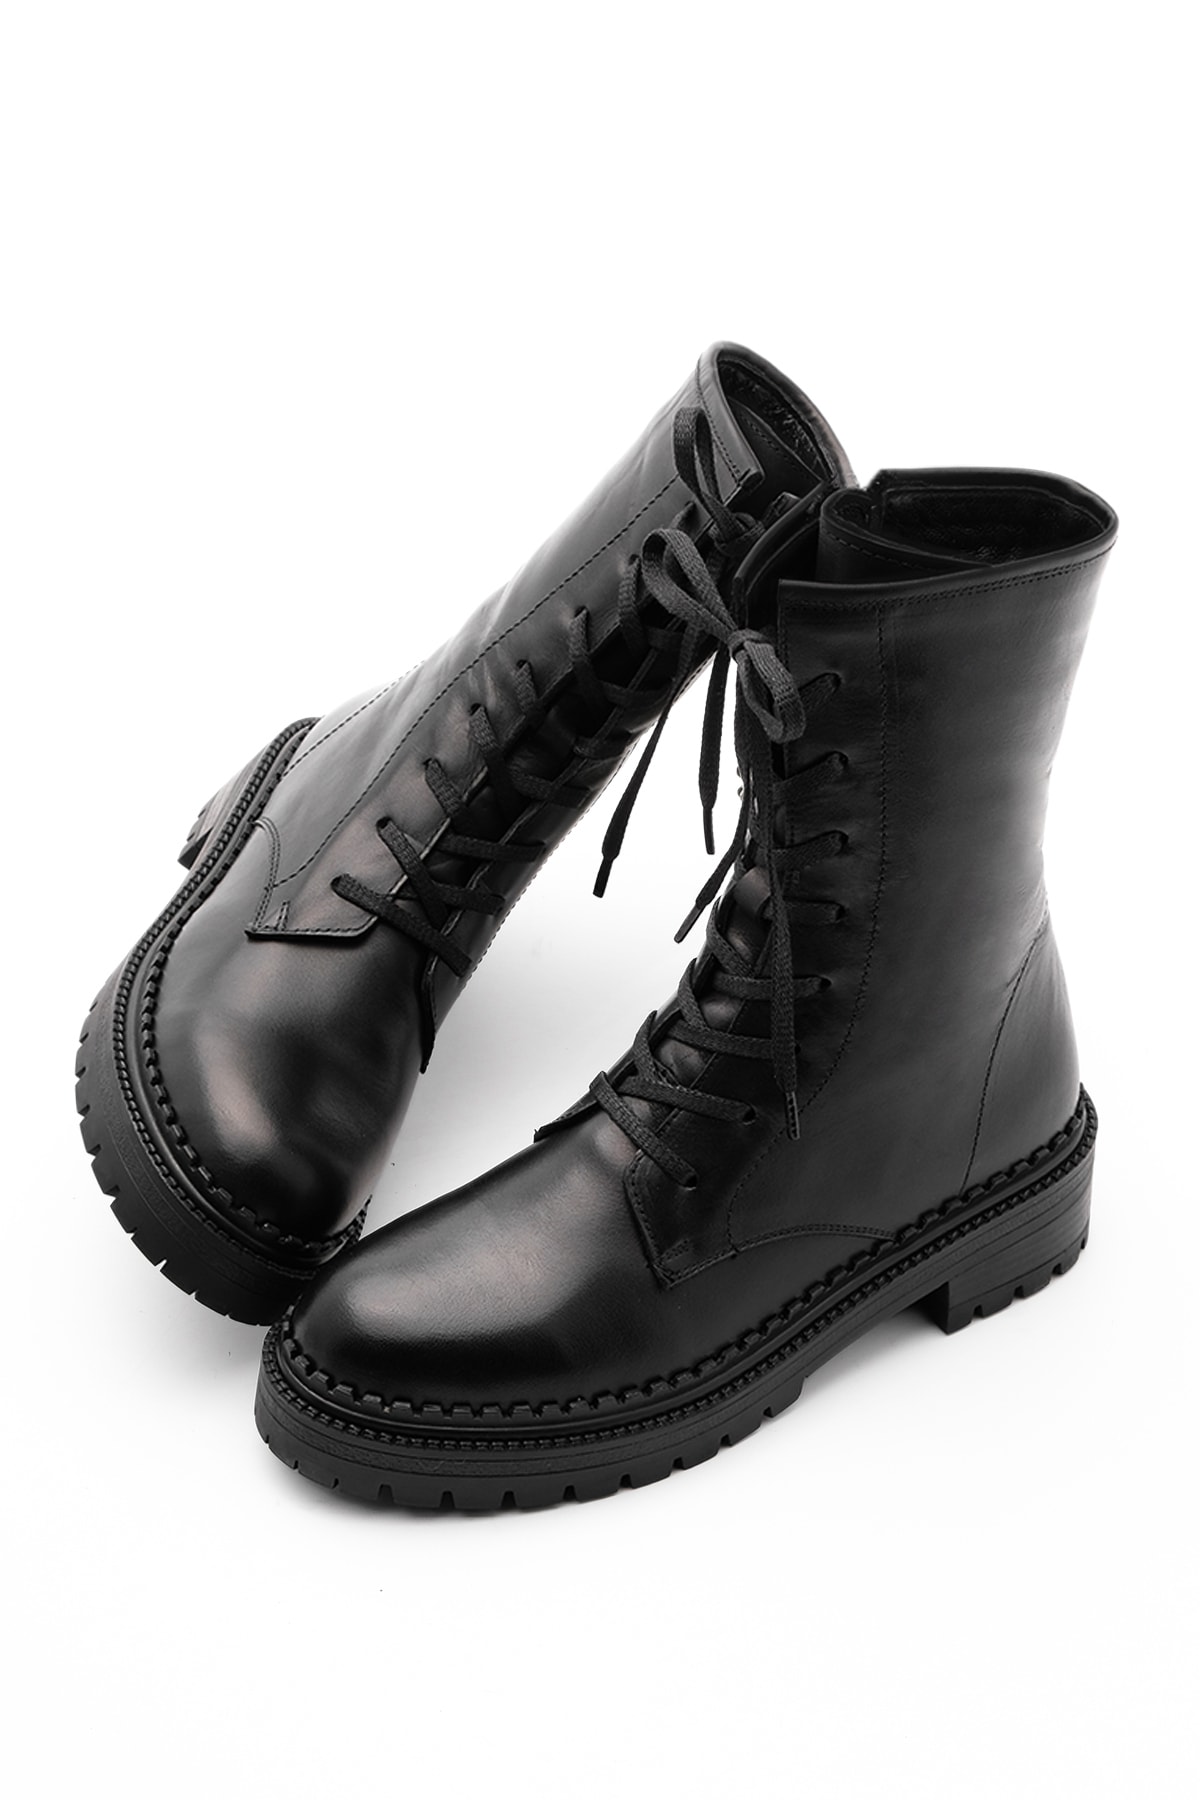 Levně Marjin Women's Genuine Leather Boots Boots with Zipper, Lace-up Serrated Sole Daily Boots Kariva Black.